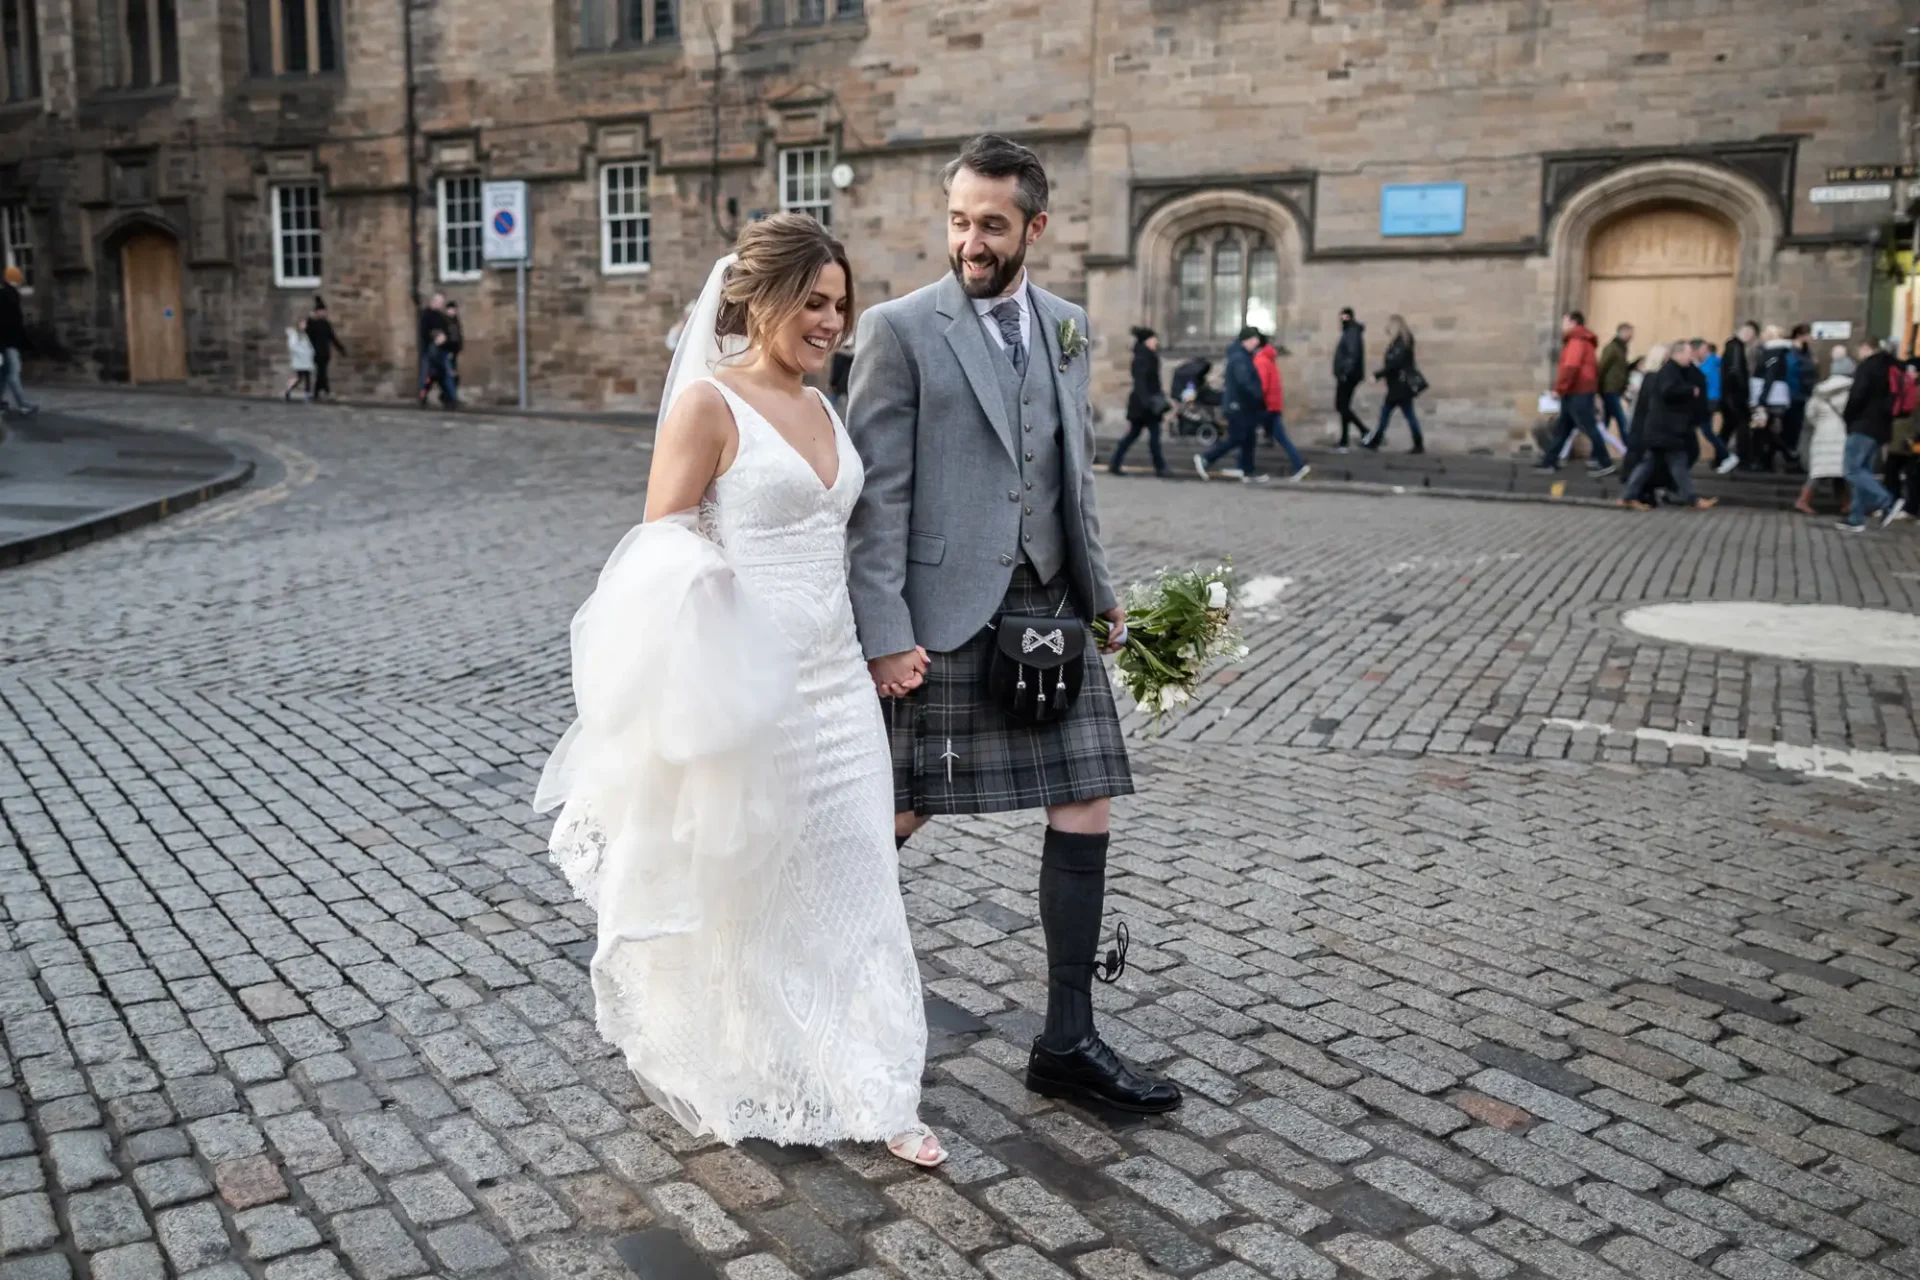 A bride in a white gown and a groom in a kilt holding hands and smiling while walking on a cobblestone street with people in the background.